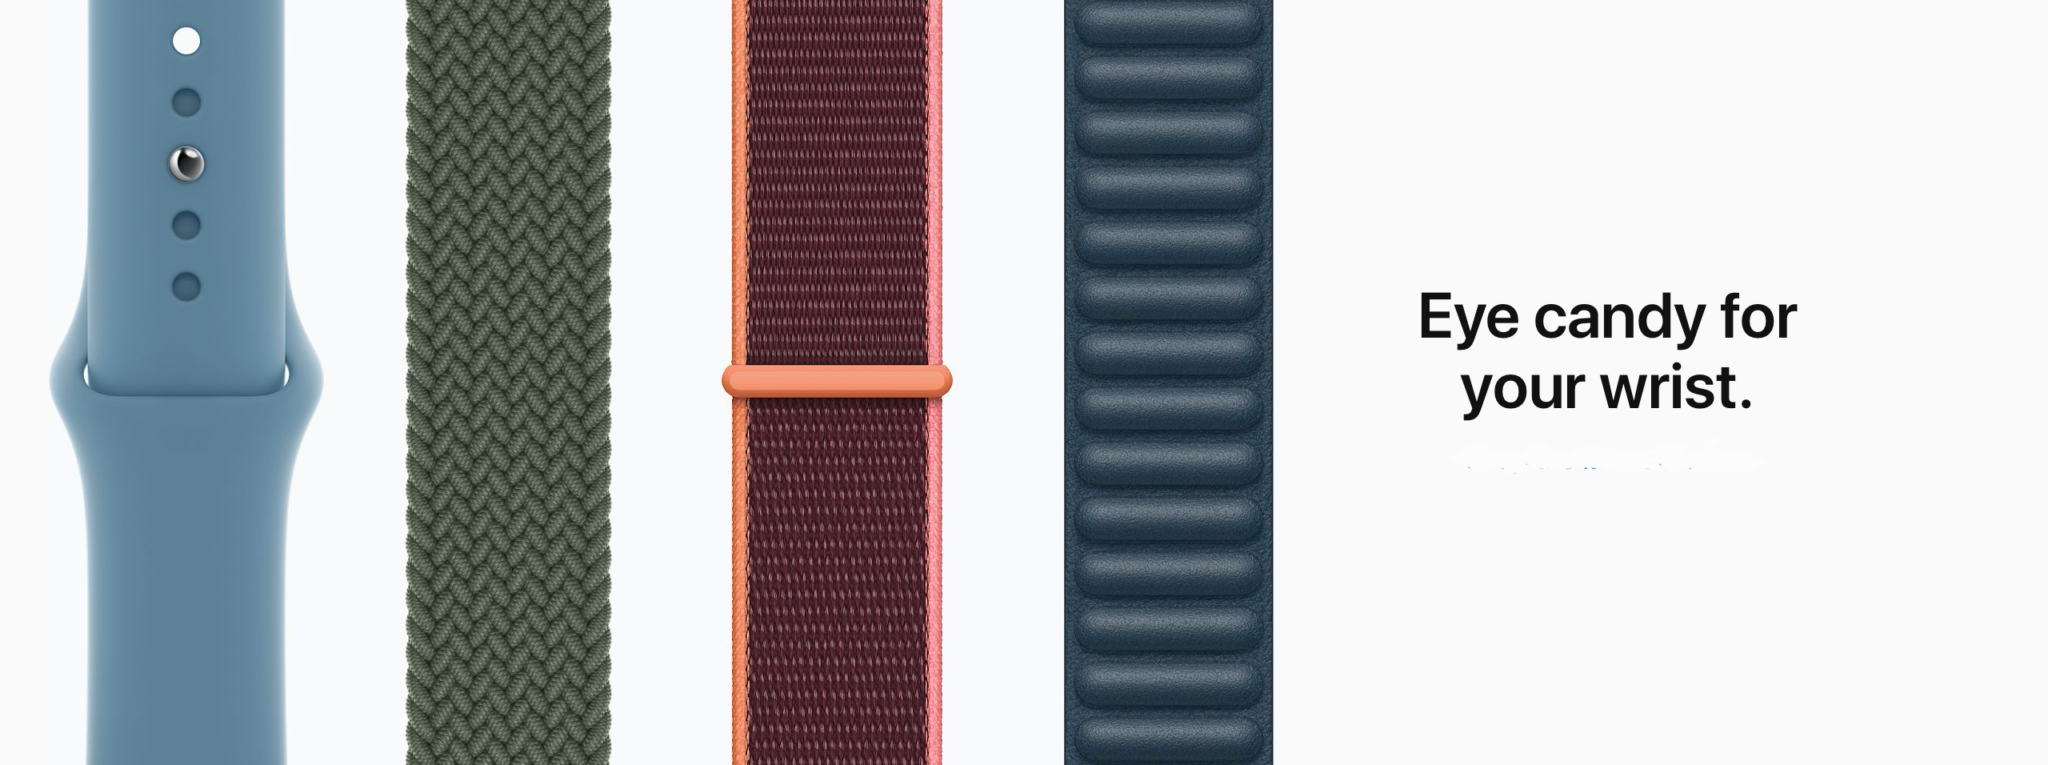 Apple Watch Bands Price in Nigeria. Buy Apple Watch Bands in Lagos and Abuja Nigeria